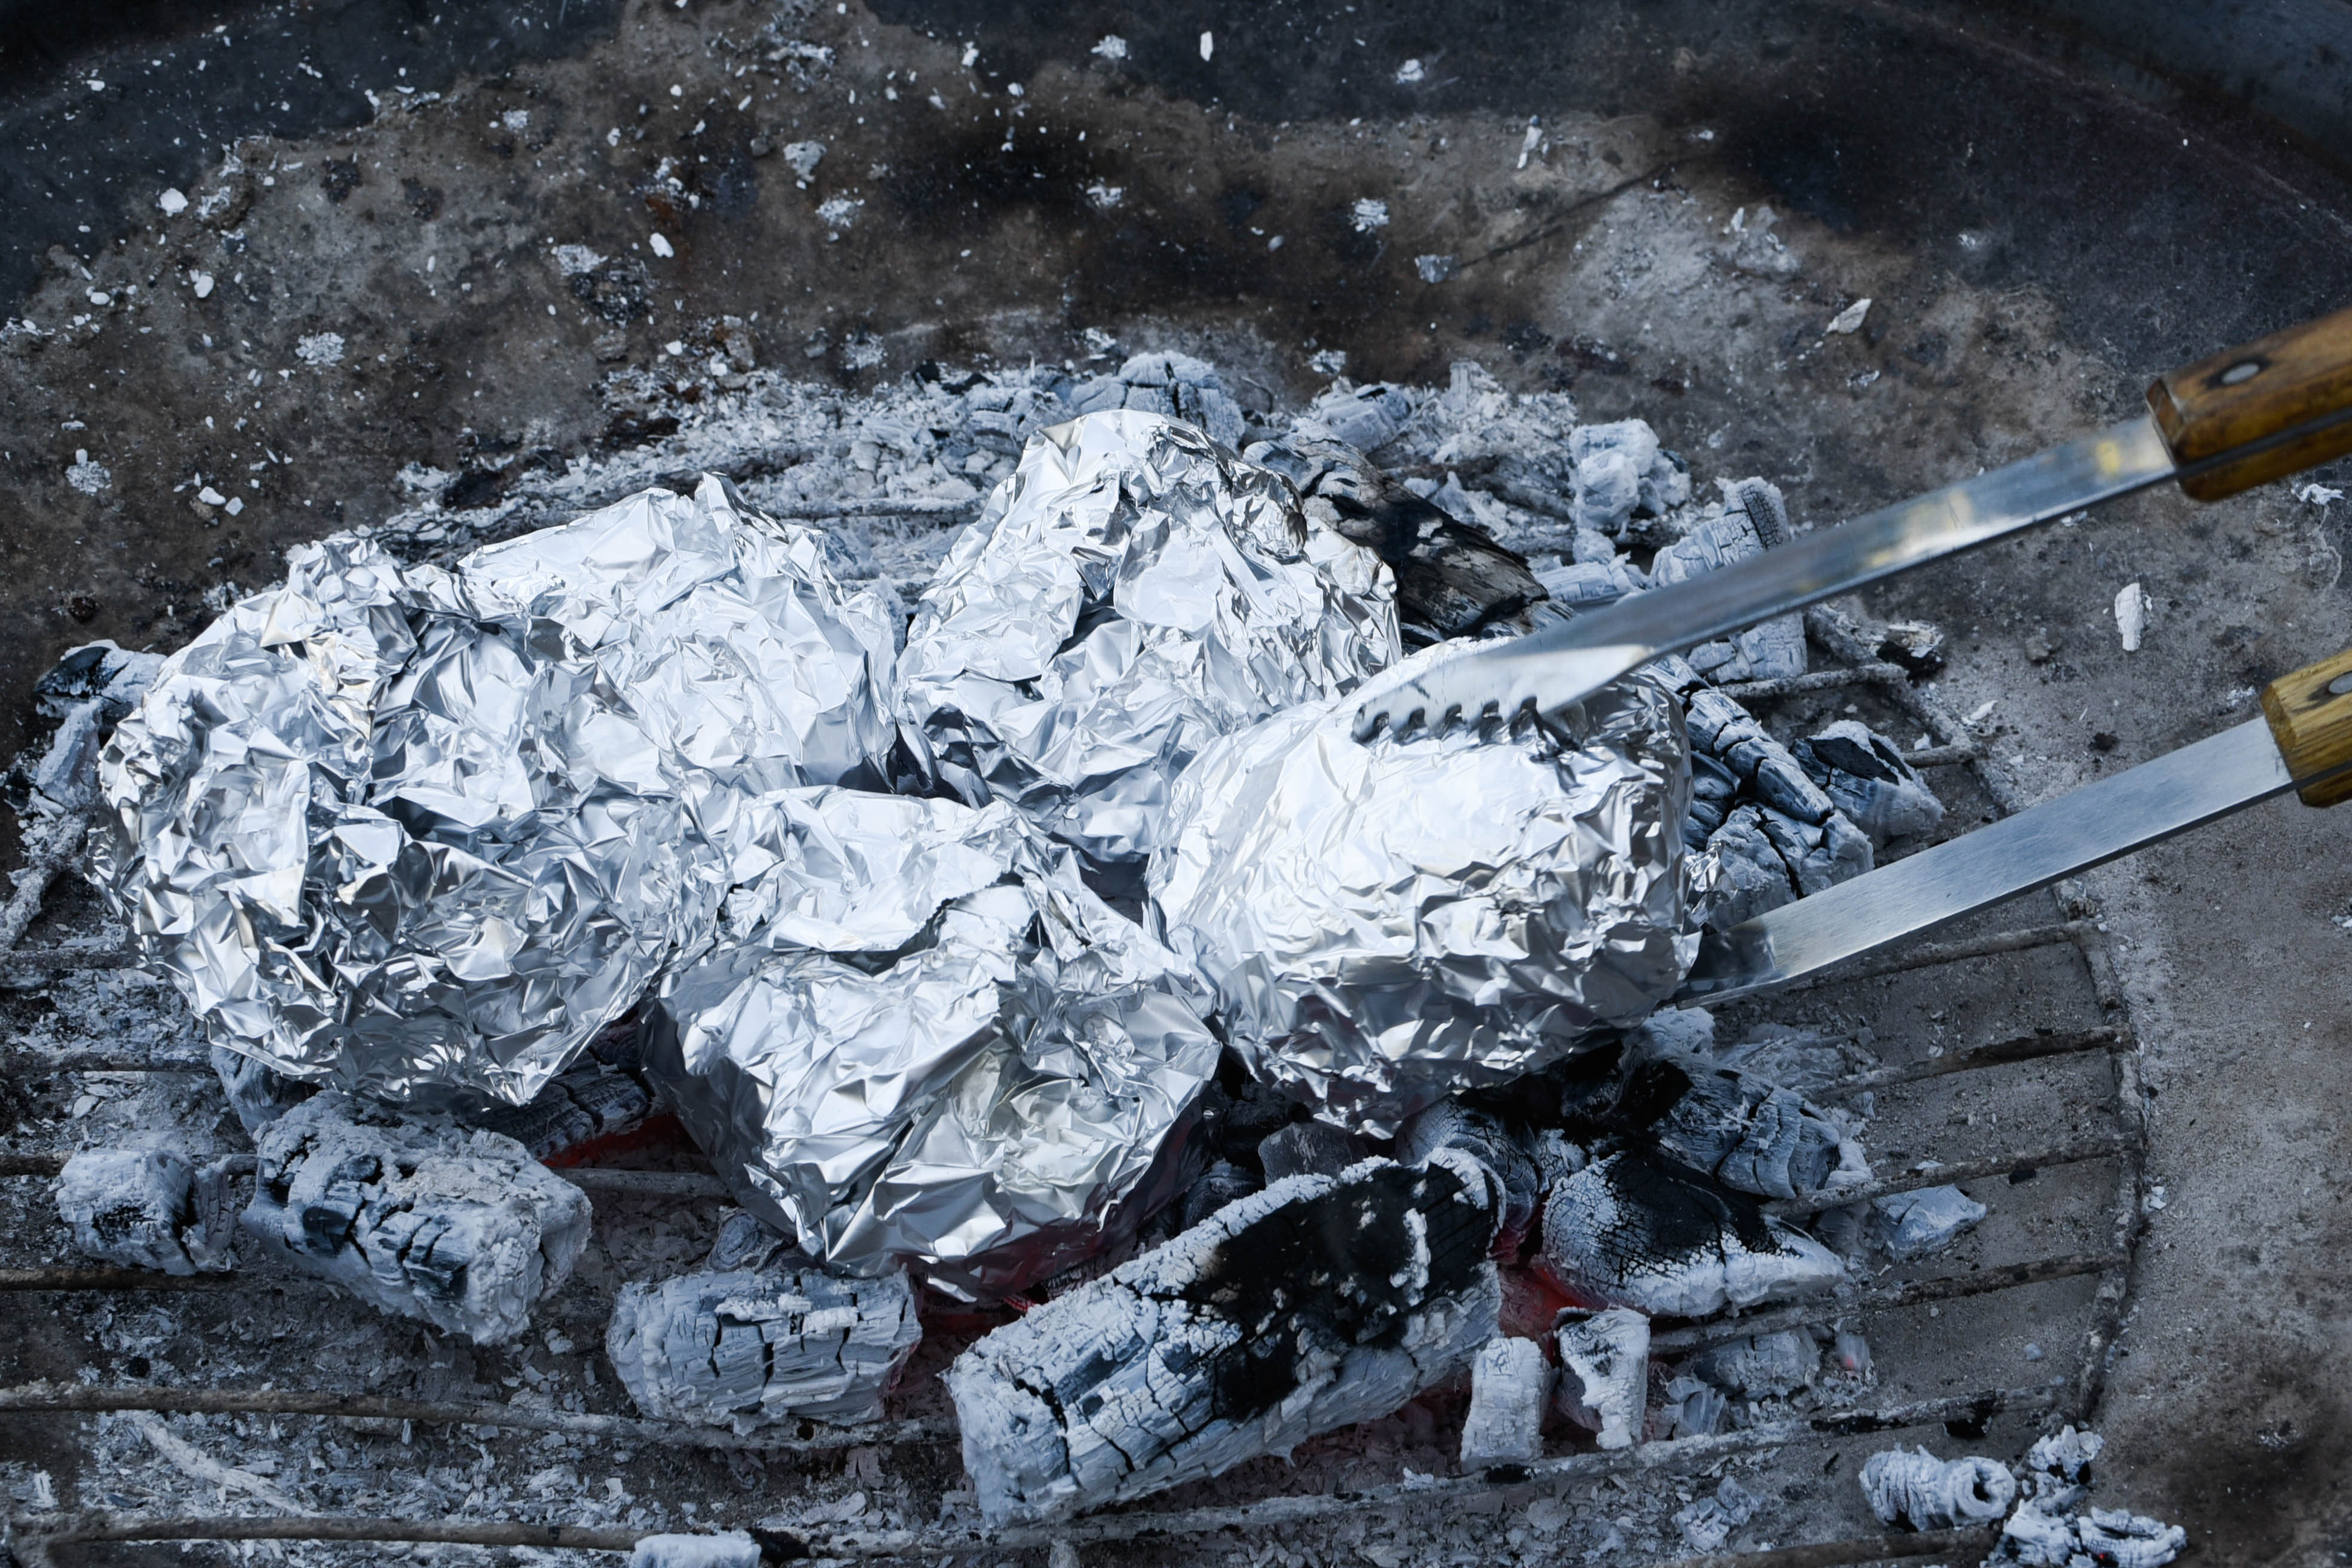 Tongs place foil-wrapped sandwiches in a barbecue pit.